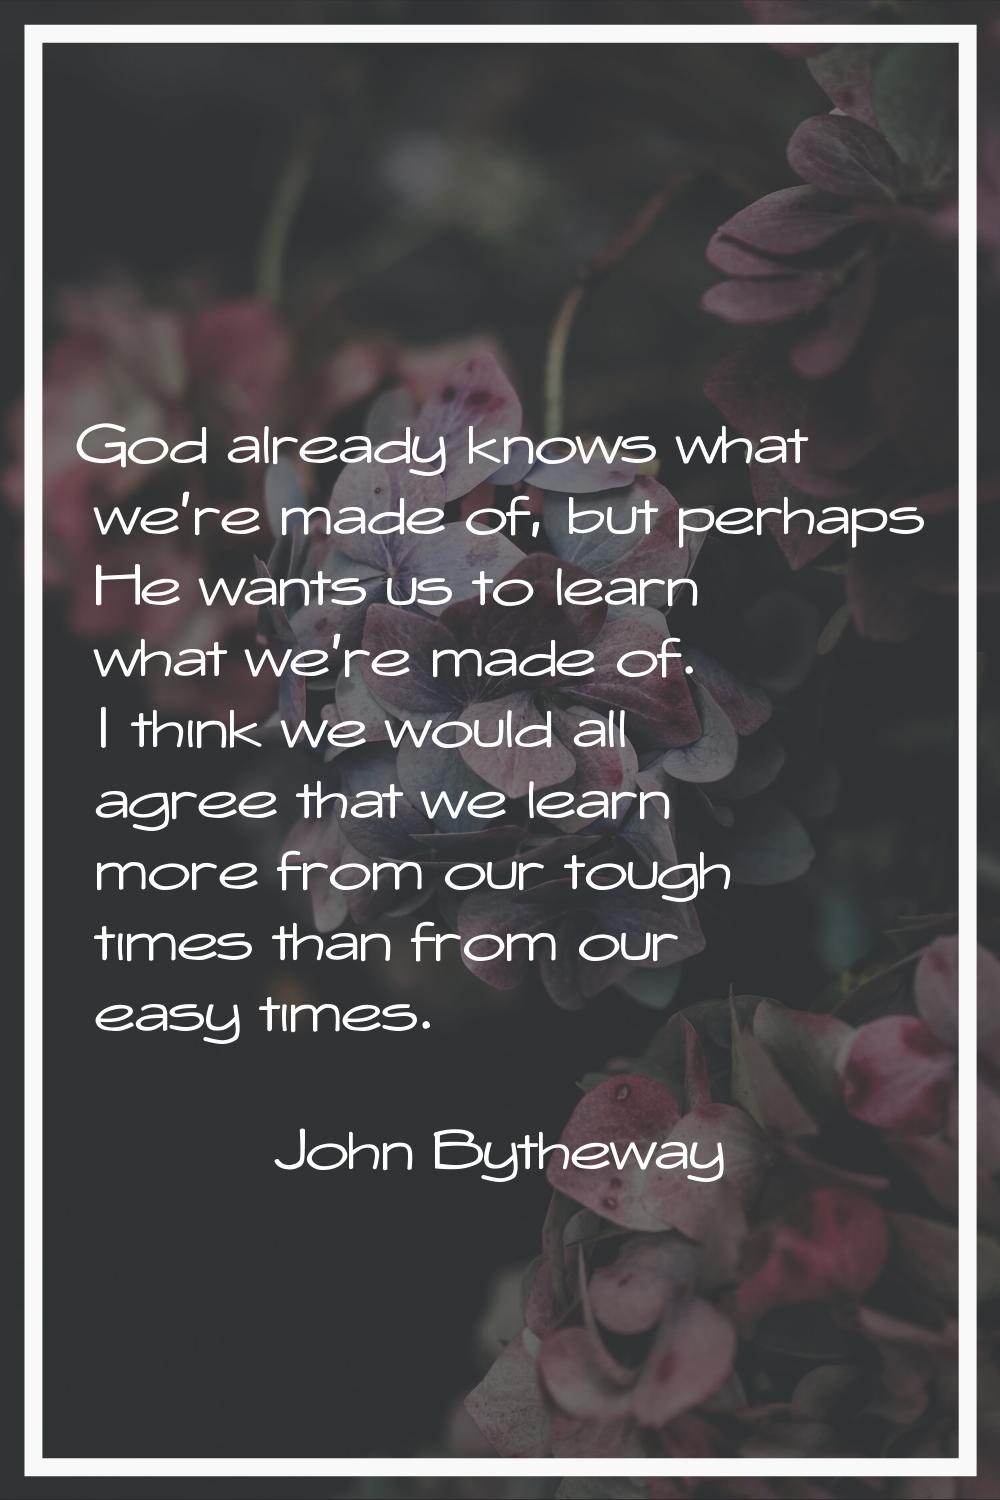 God already knows what we're made of, but perhaps He wants us to learn what we're made of. I think 